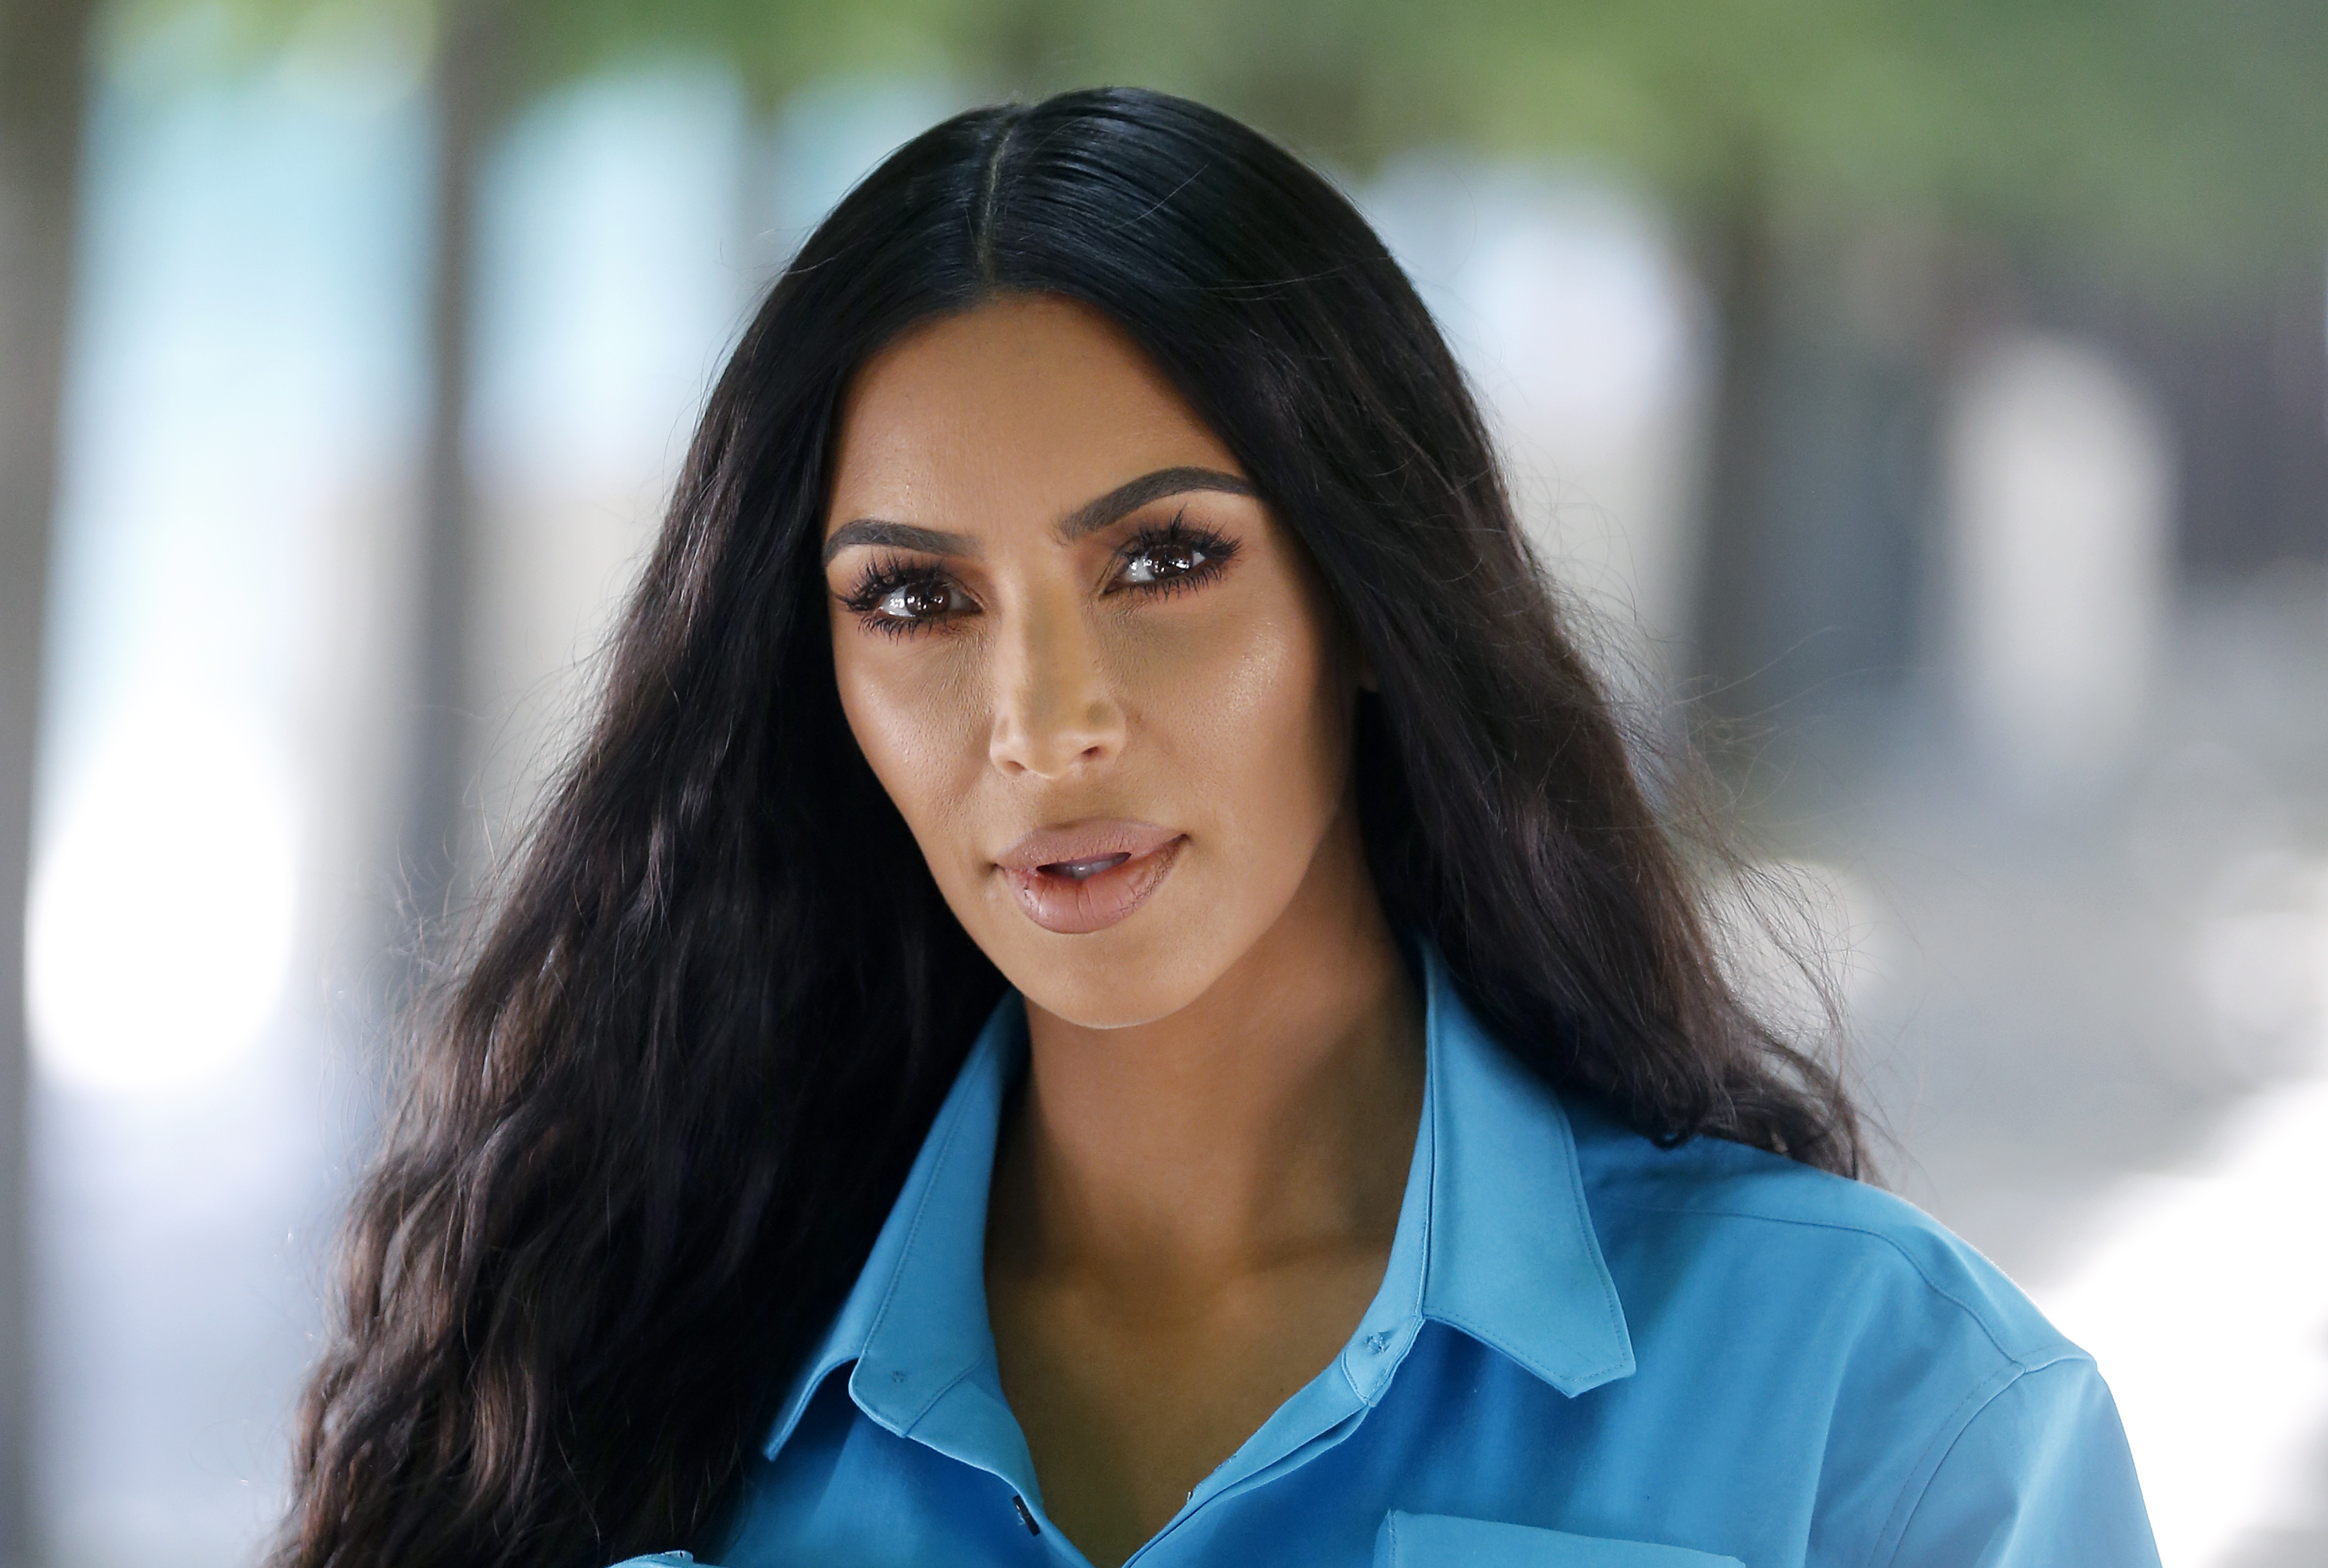 Kim Kardashian West staring at the camera while standing outside.